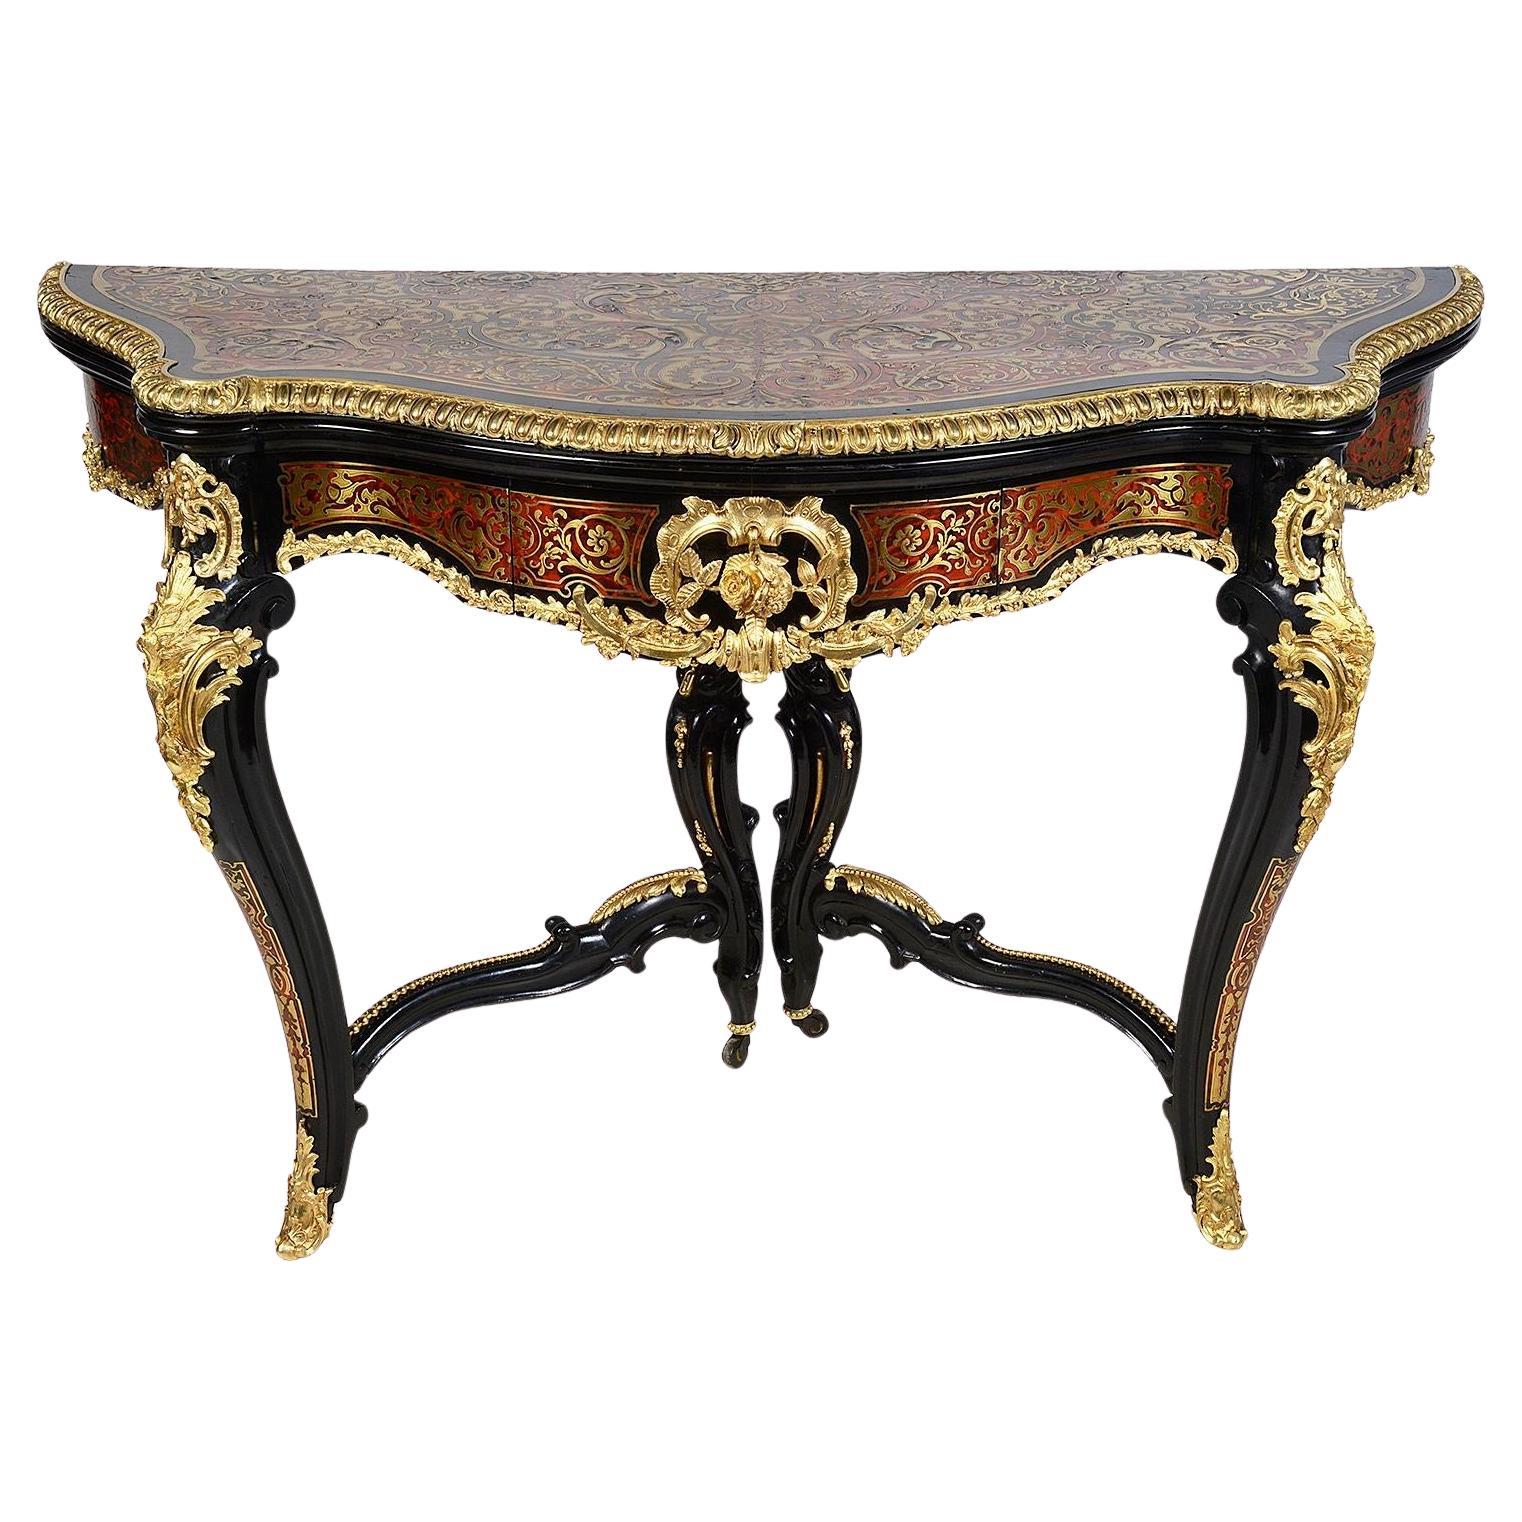 Pair 19th Century French Boulle card tables